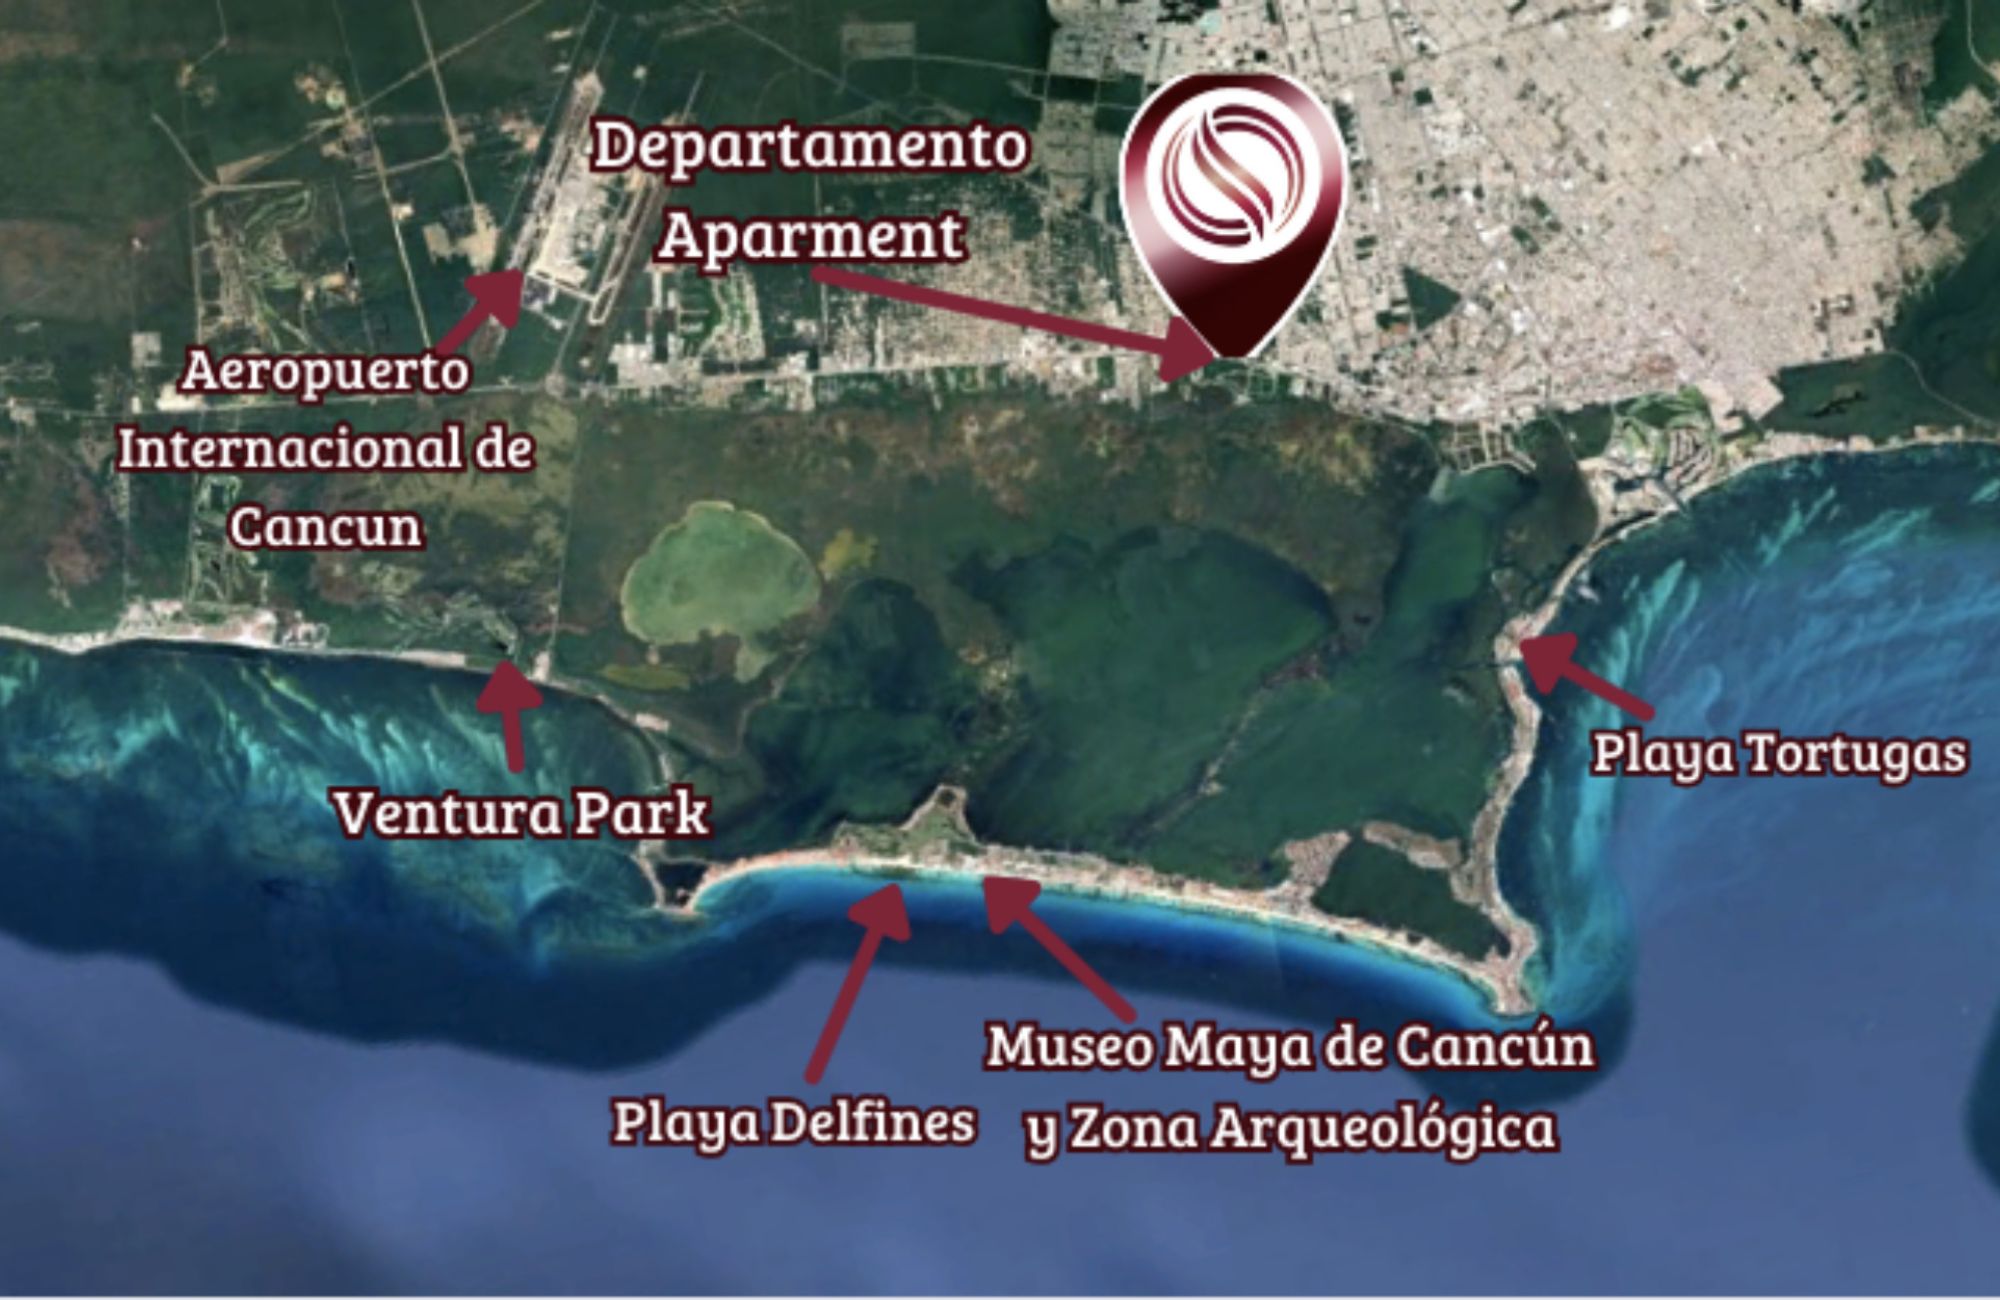 Beachfront apartment with beach club, and more pre-construction, for sale Cancun